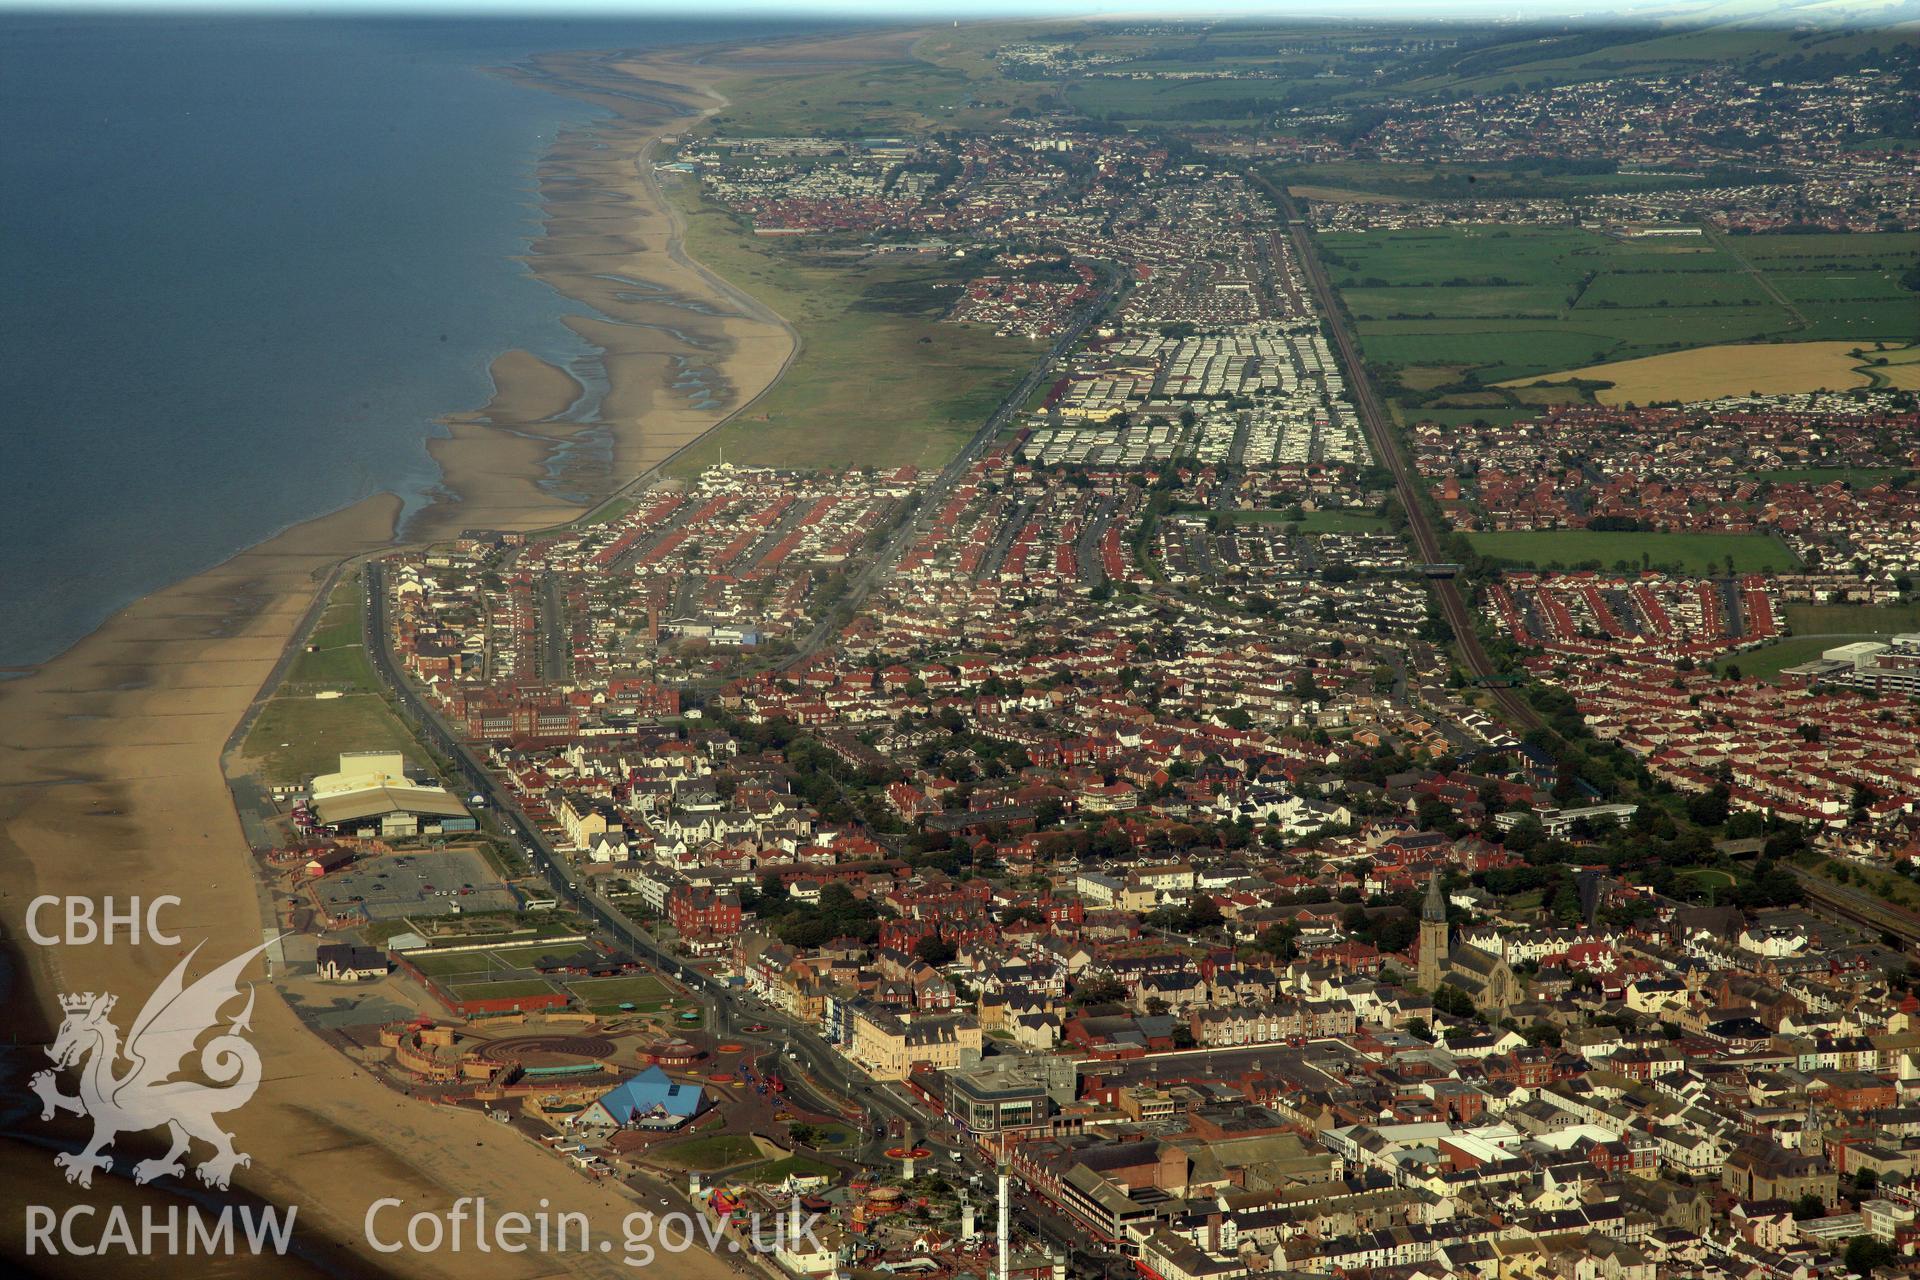 RCAHMW colour oblique photograph of Rhyl. Taken by Toby Driver and Oliver Davies on 27/07/2011.